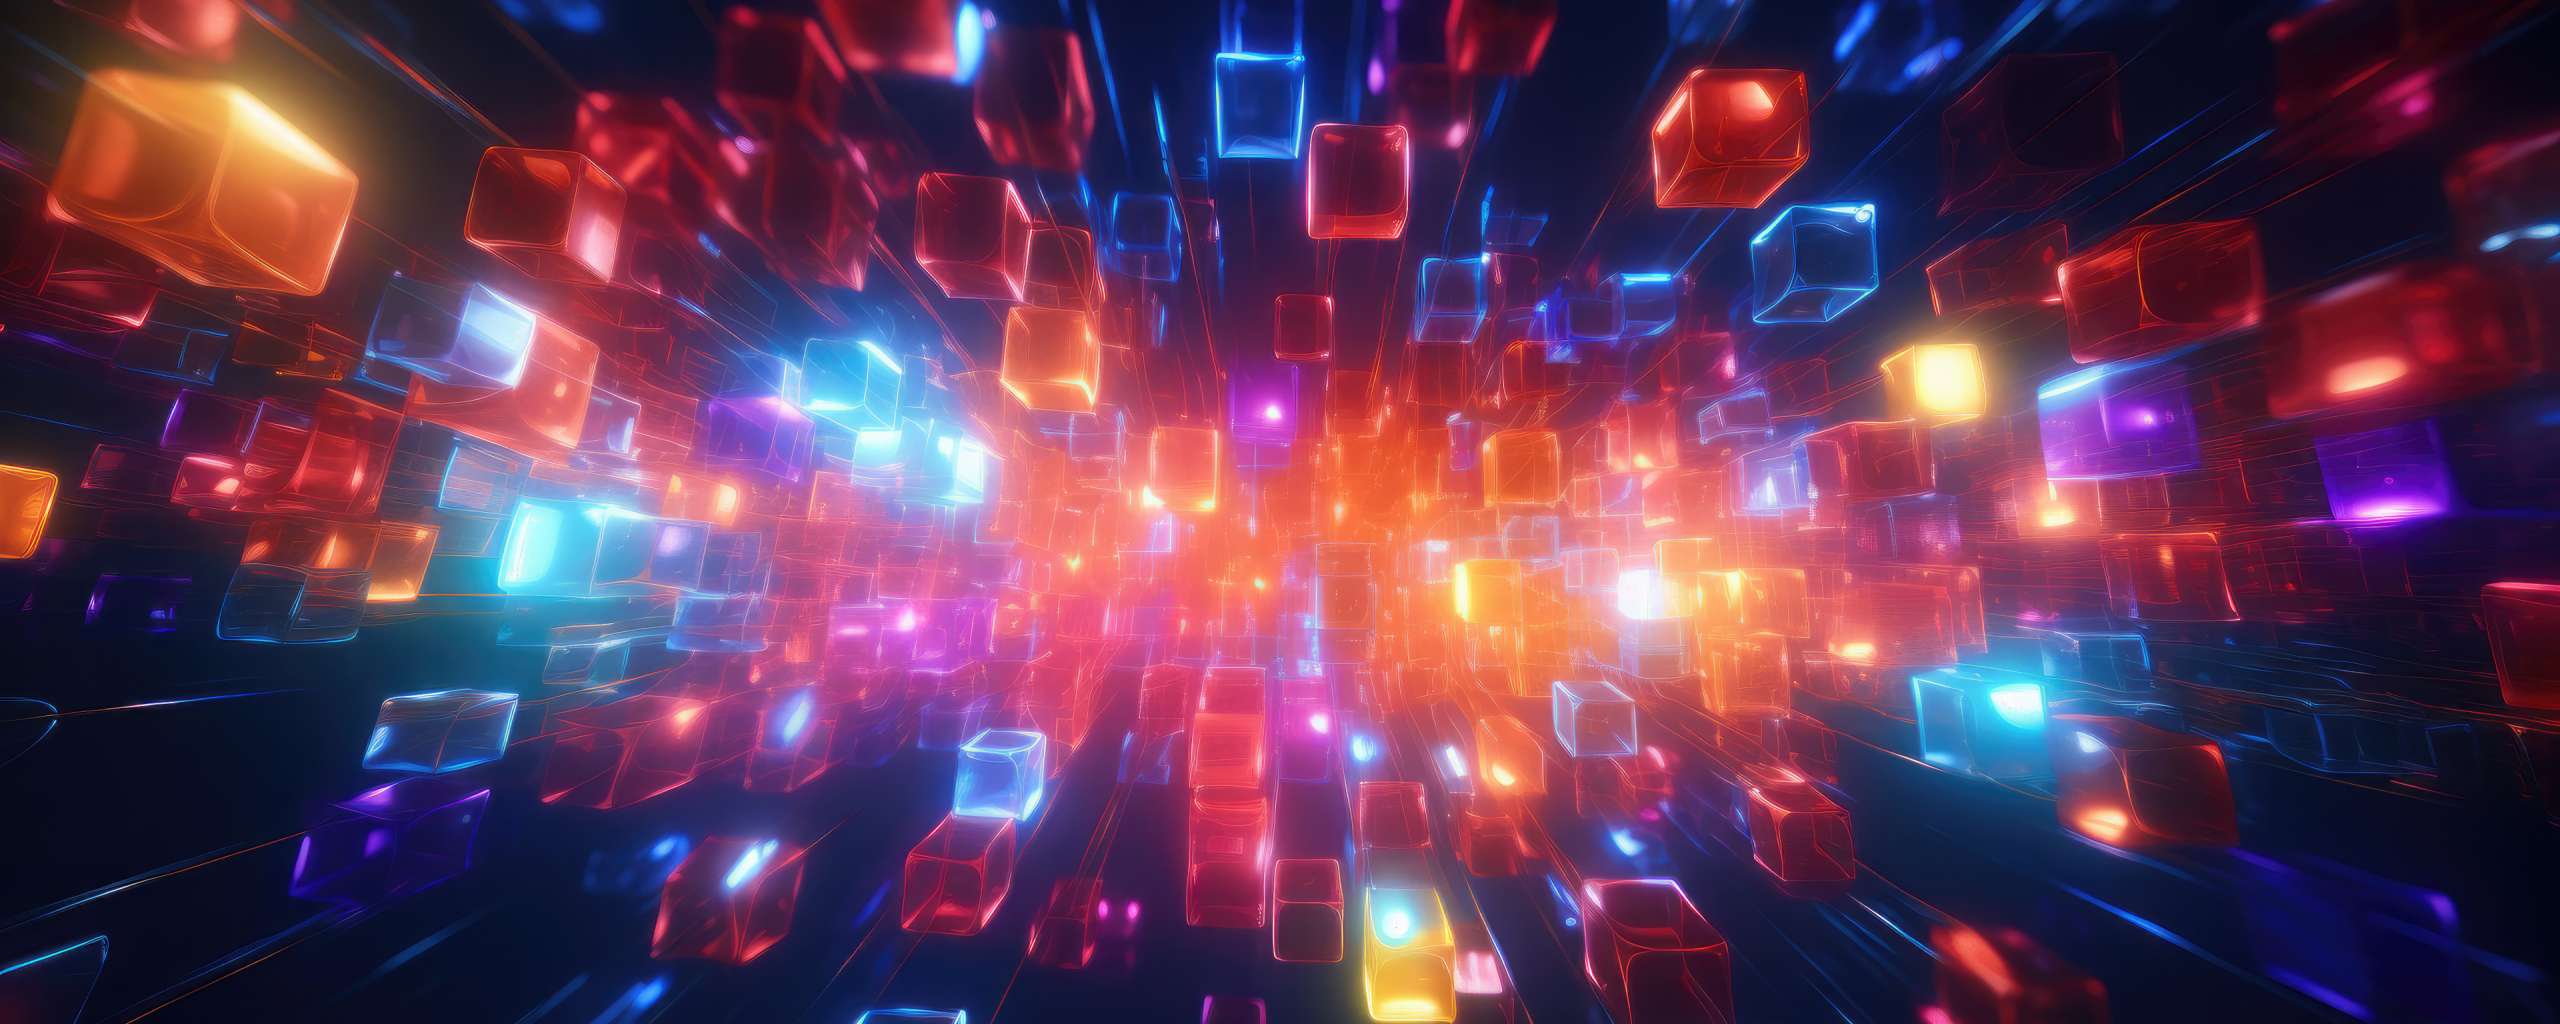 Abstract, lights cubes, colorful, 2560x1024 wallpaper